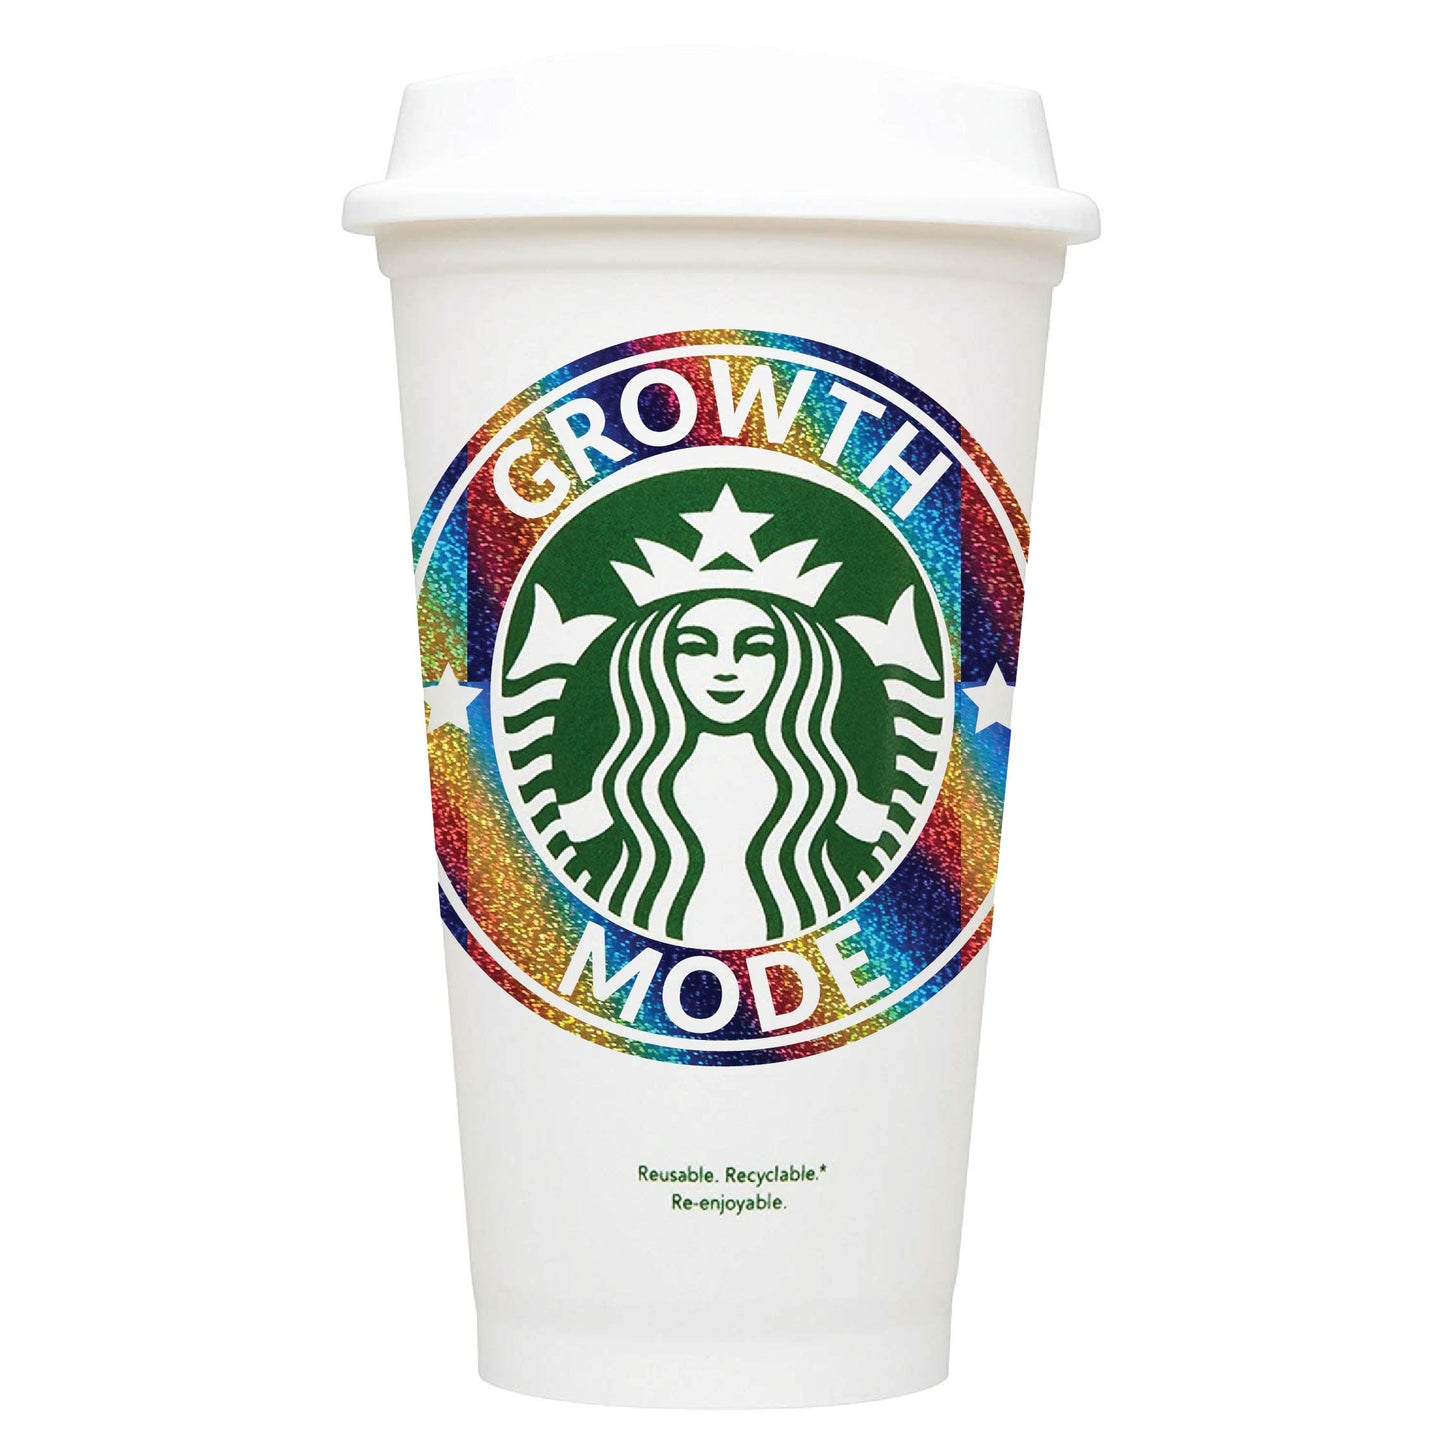 Growth Mode Starbucks Hot Cup